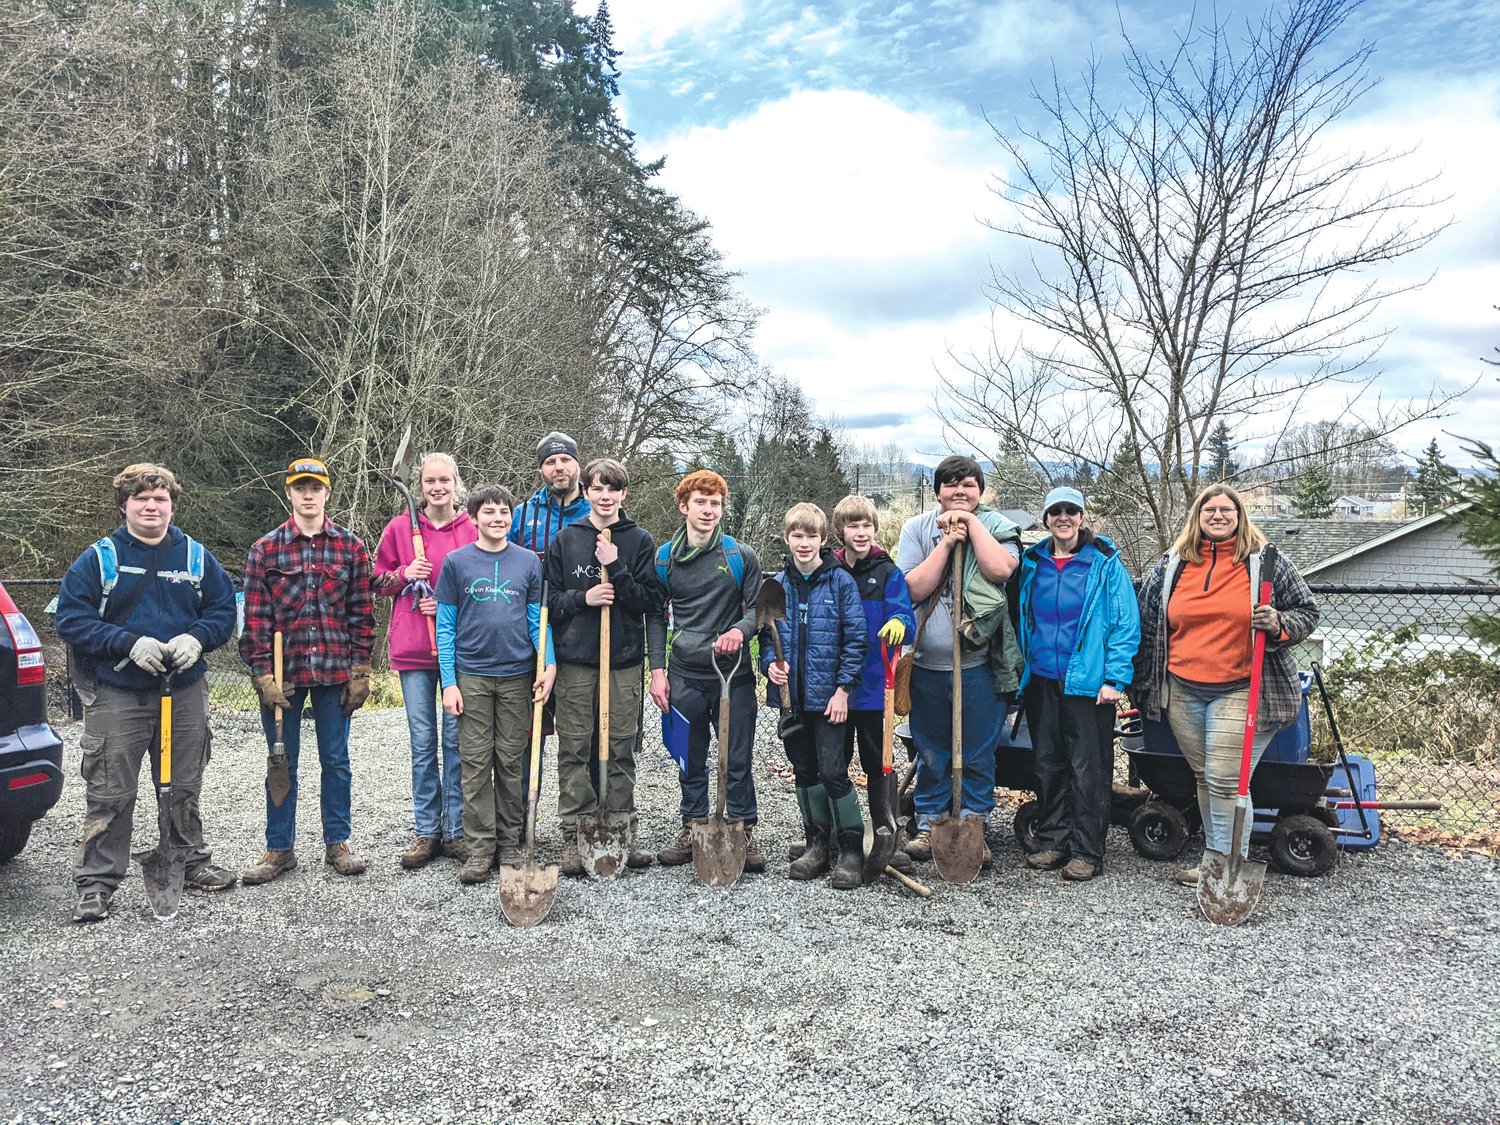 Members of the Boy Scout Troop No. 373, based in Chehalis, help transplant sword ferns and other native plants at the Seminary Hill Natural Area on Jan. 22.